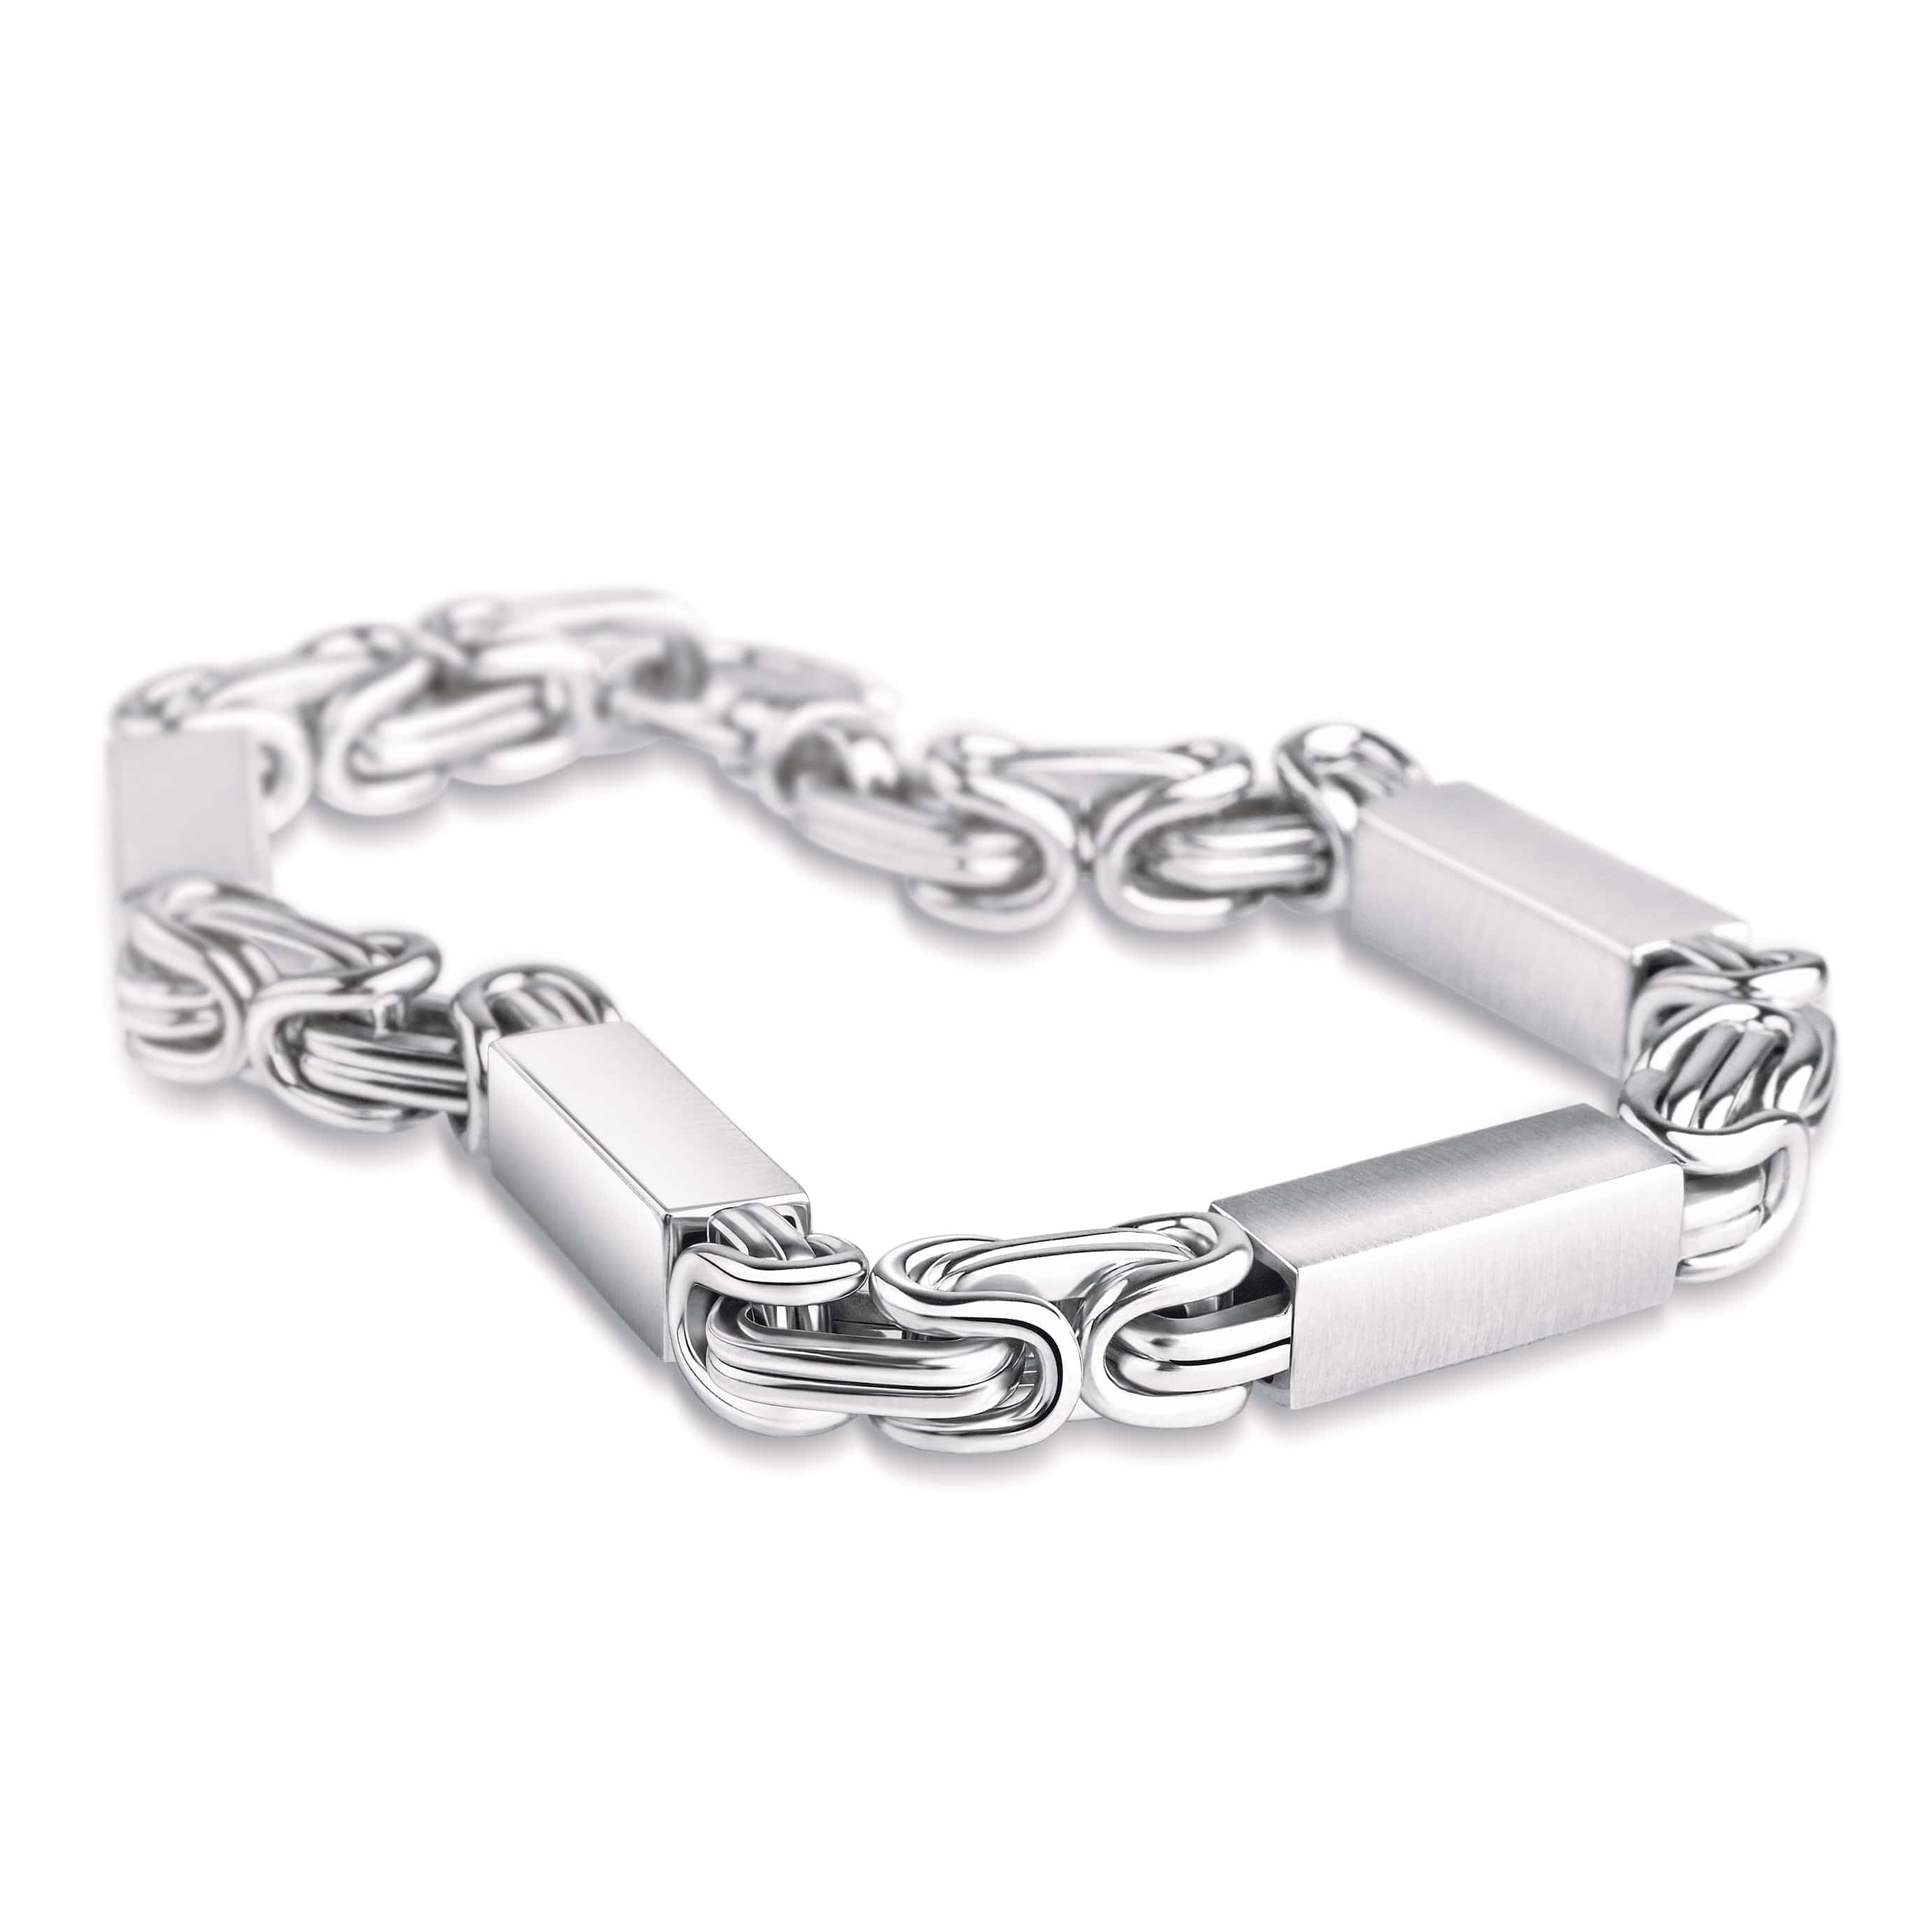 Fashion Silver Male Bracelet Isolated On Stock Photo 447323182   Shutterstock